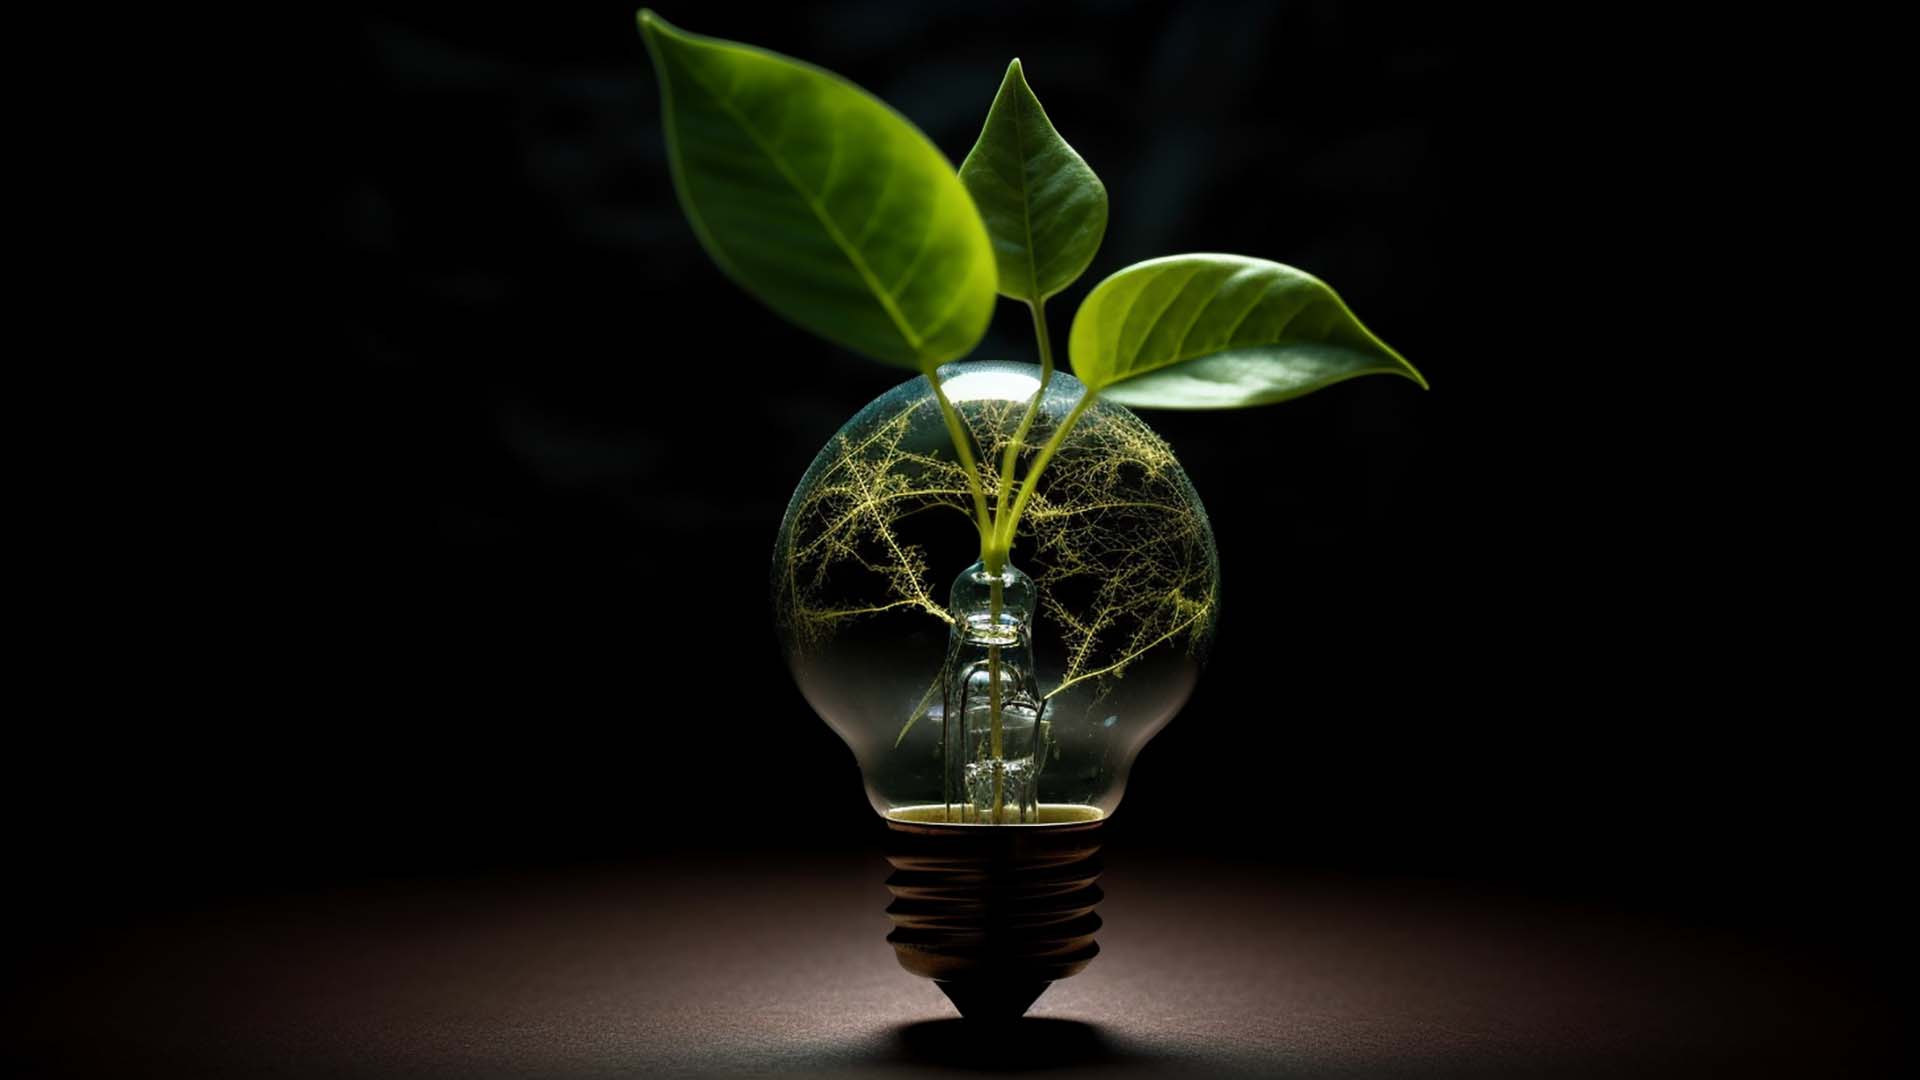 A light bulb symbolizing innovative ideas, with green leaves growing out of it, representing green tech.